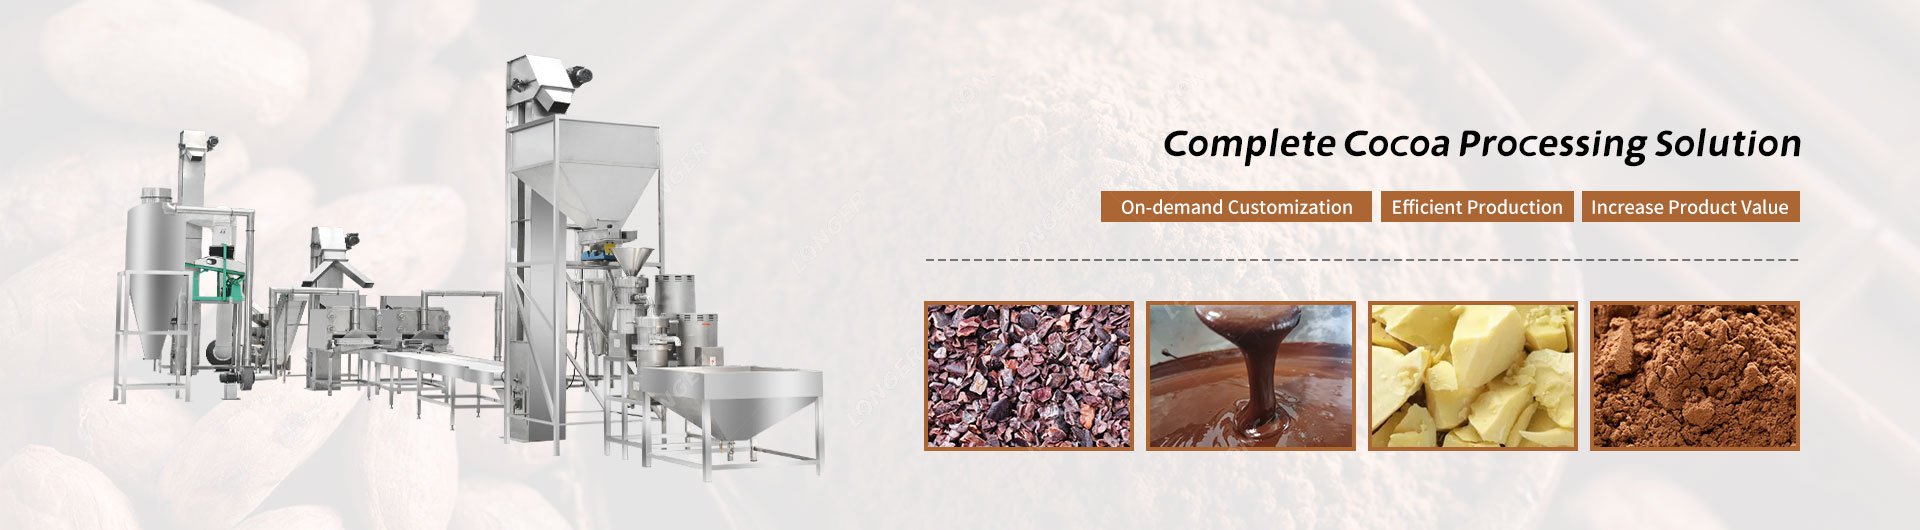 Complete Cocoa Processing Solution